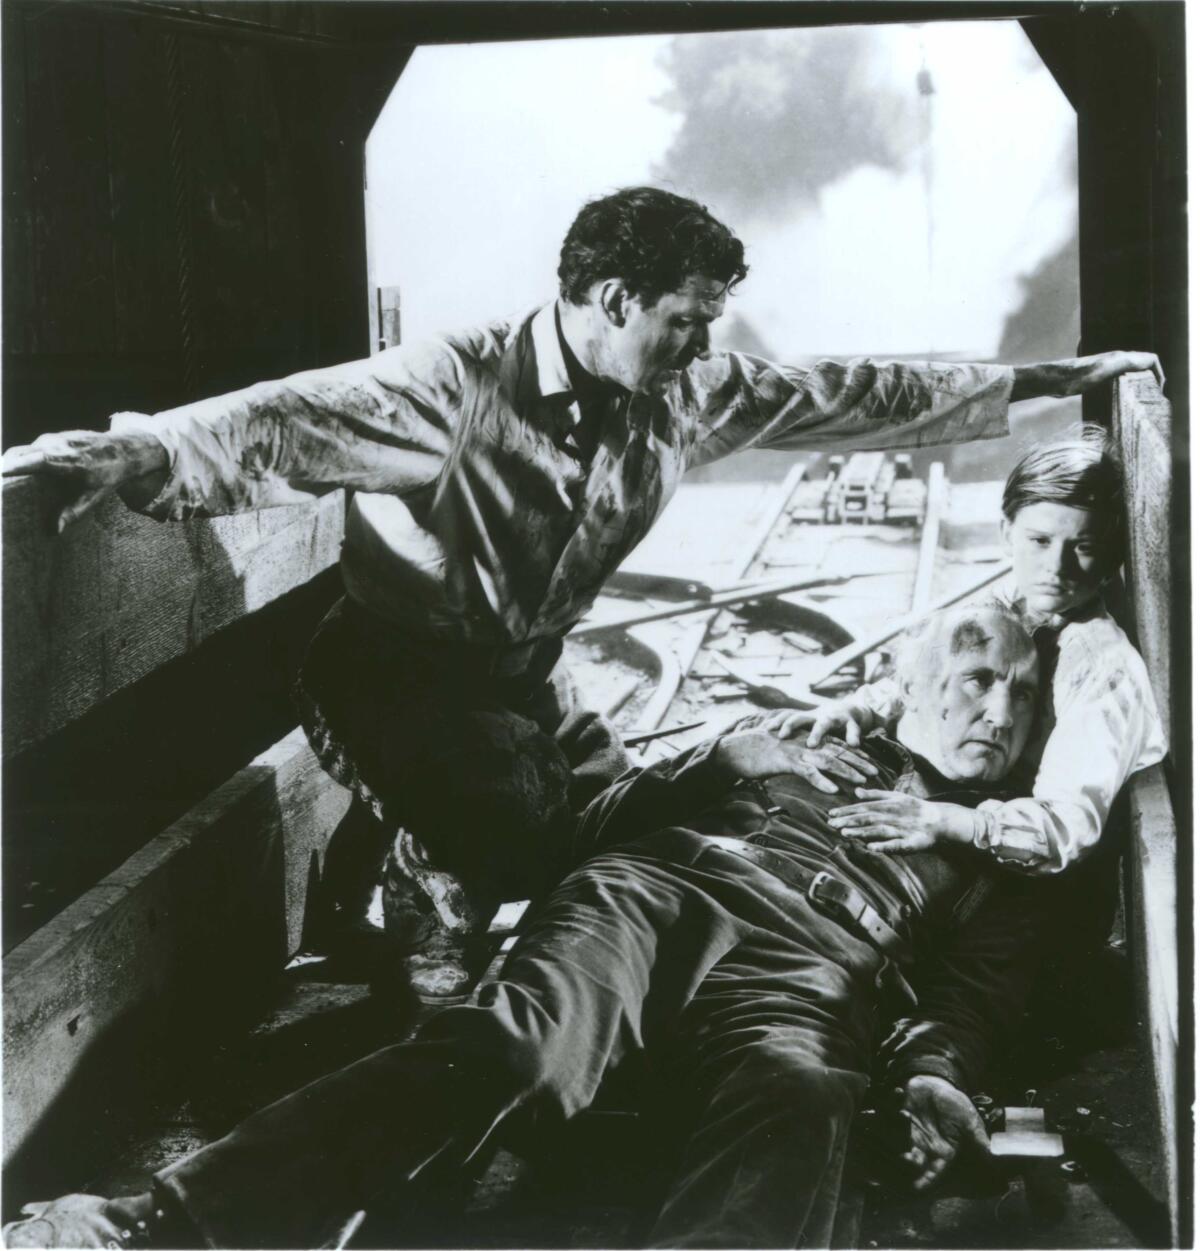 In a black-and-white movie still, a boy and a young man sit with an older man with a head injury in a coal mine.